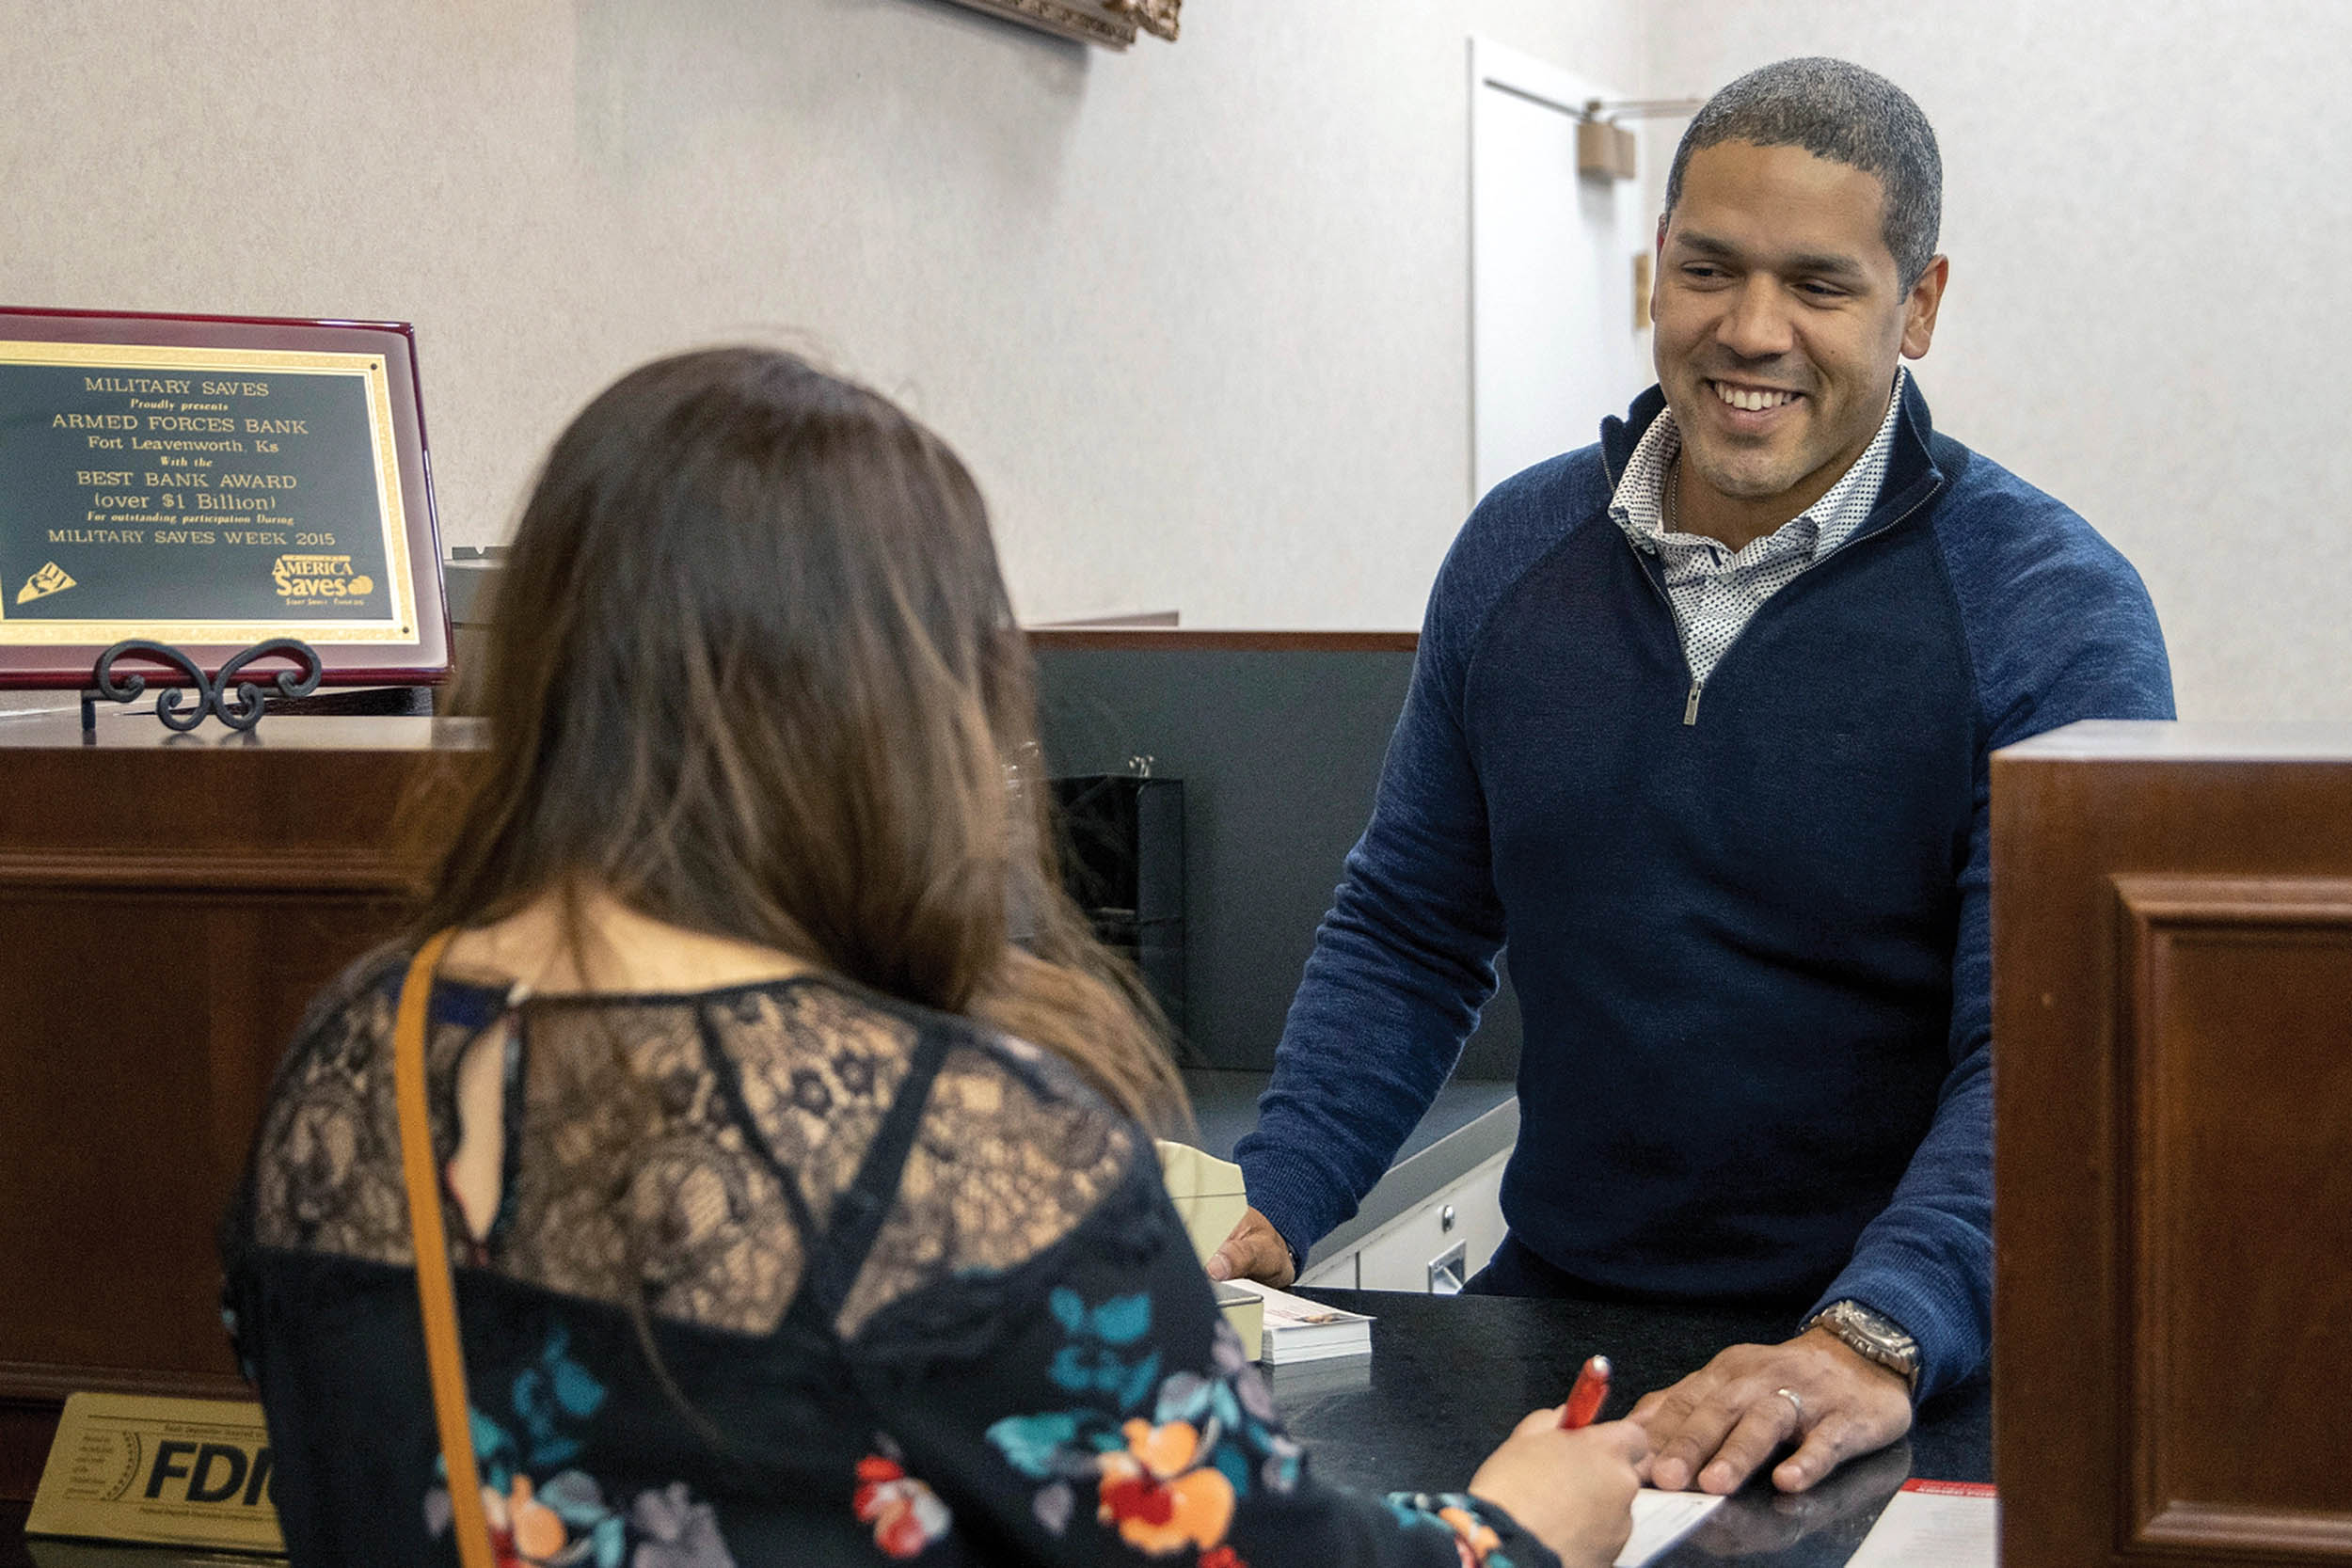 Army Captain Pablo Mendez Adorno, Training With Industry banking officer student, helps customer at Armed Forces Bank, Fort Leavenworth,
Kansas, March 23, 2022 (U.S. Army/Mark R.W. Orders-Woempner)